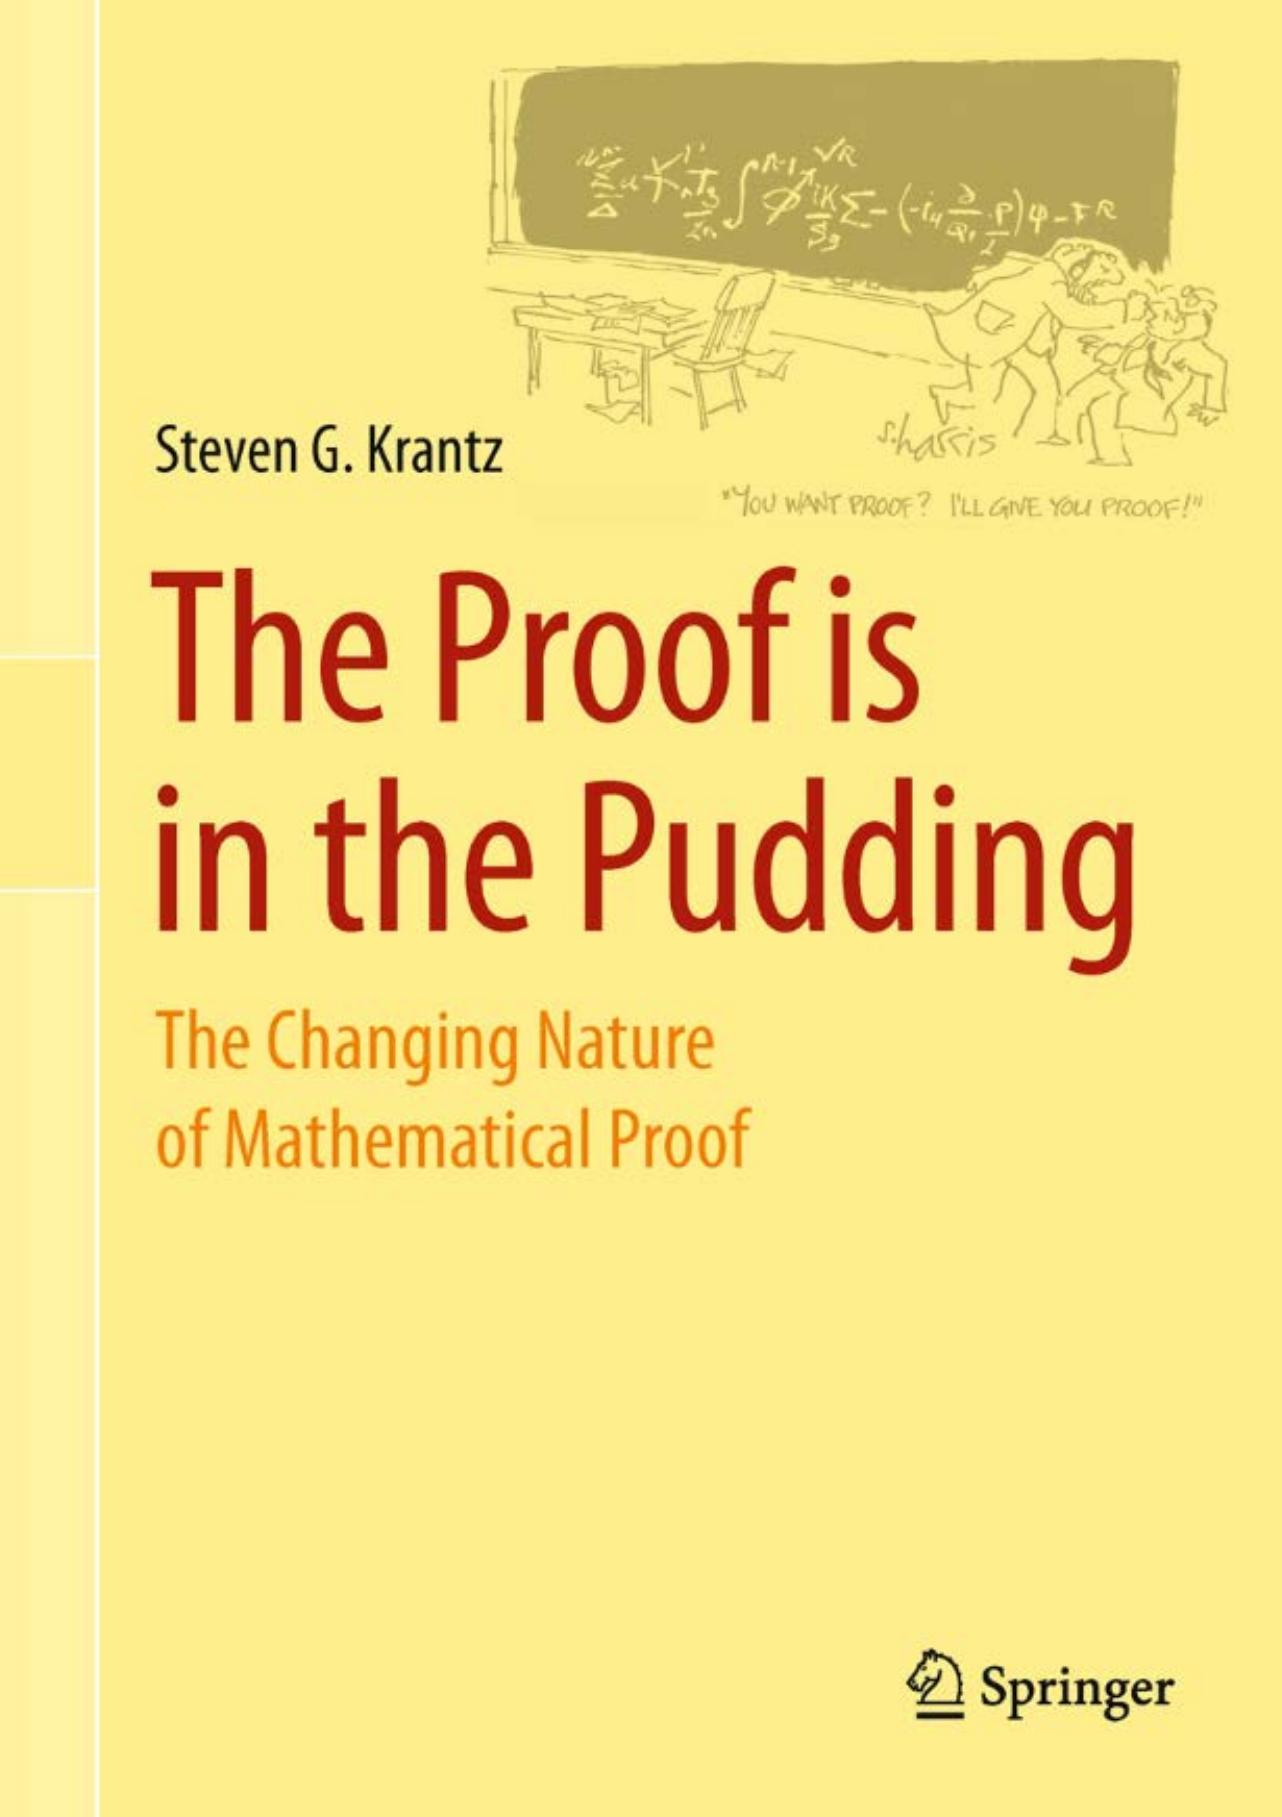 The Proof Is in the Pudding: The Changing Nature of Mathematical Proof by Steven G. Krantz